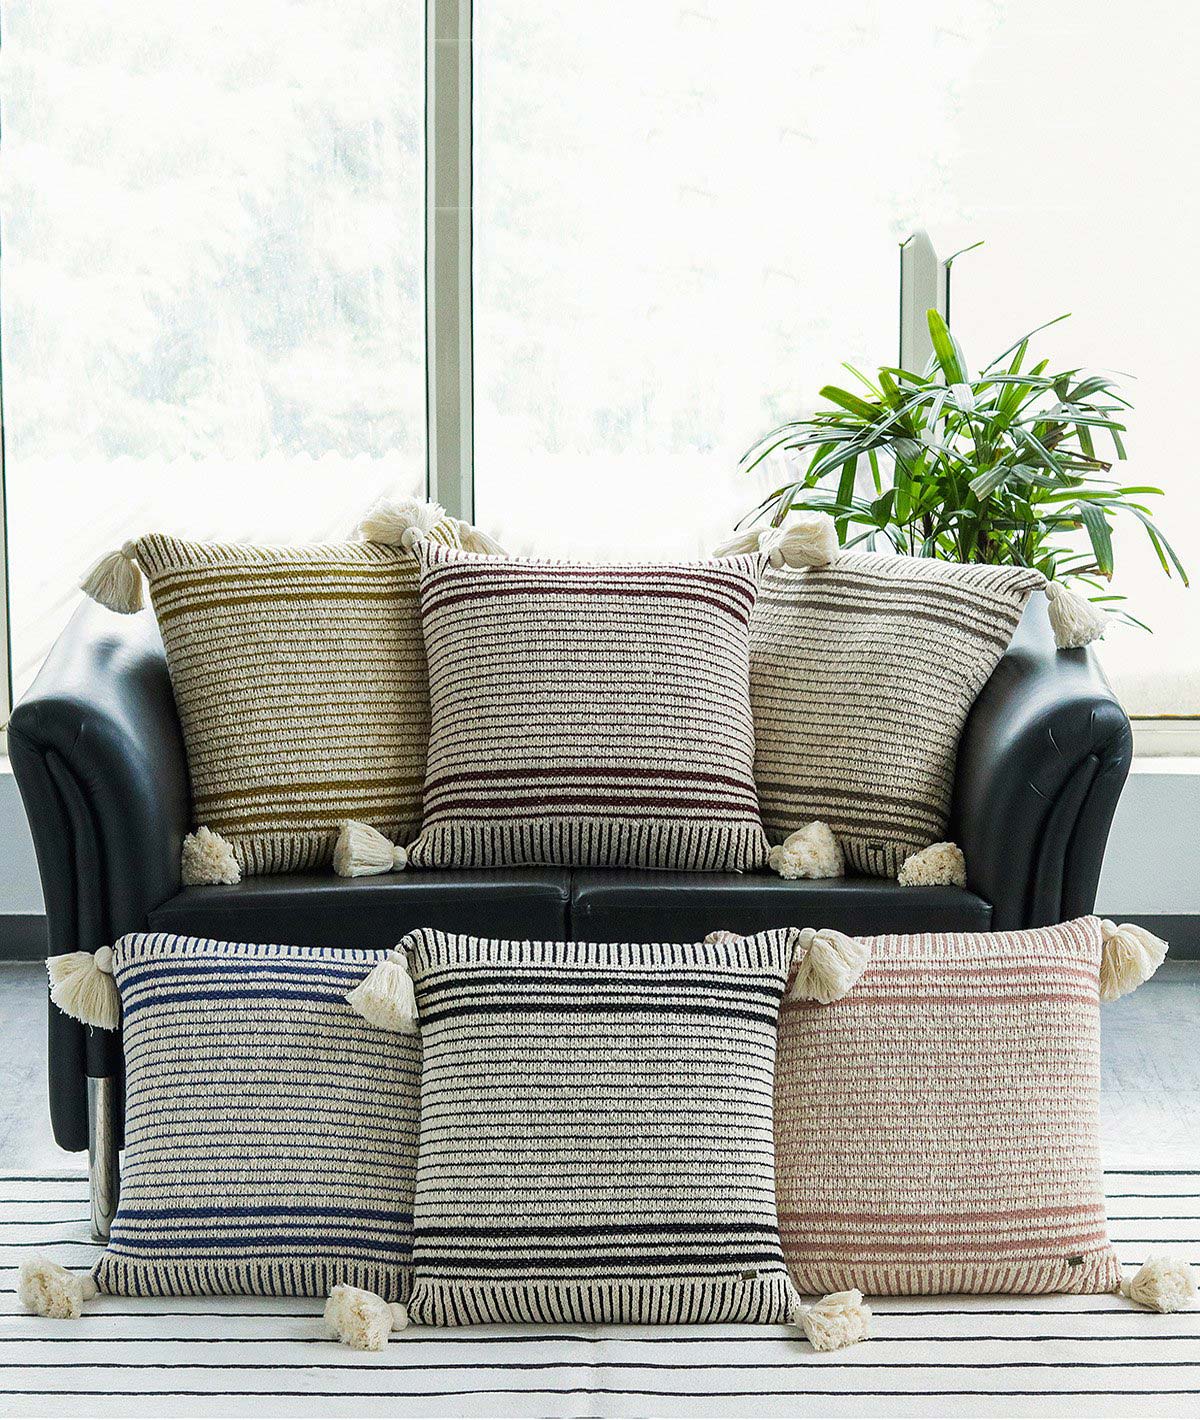 Stripe Square Cotton Knitted Decorative Grey & Natural Color 18 x 18 Inches Cushion Cover